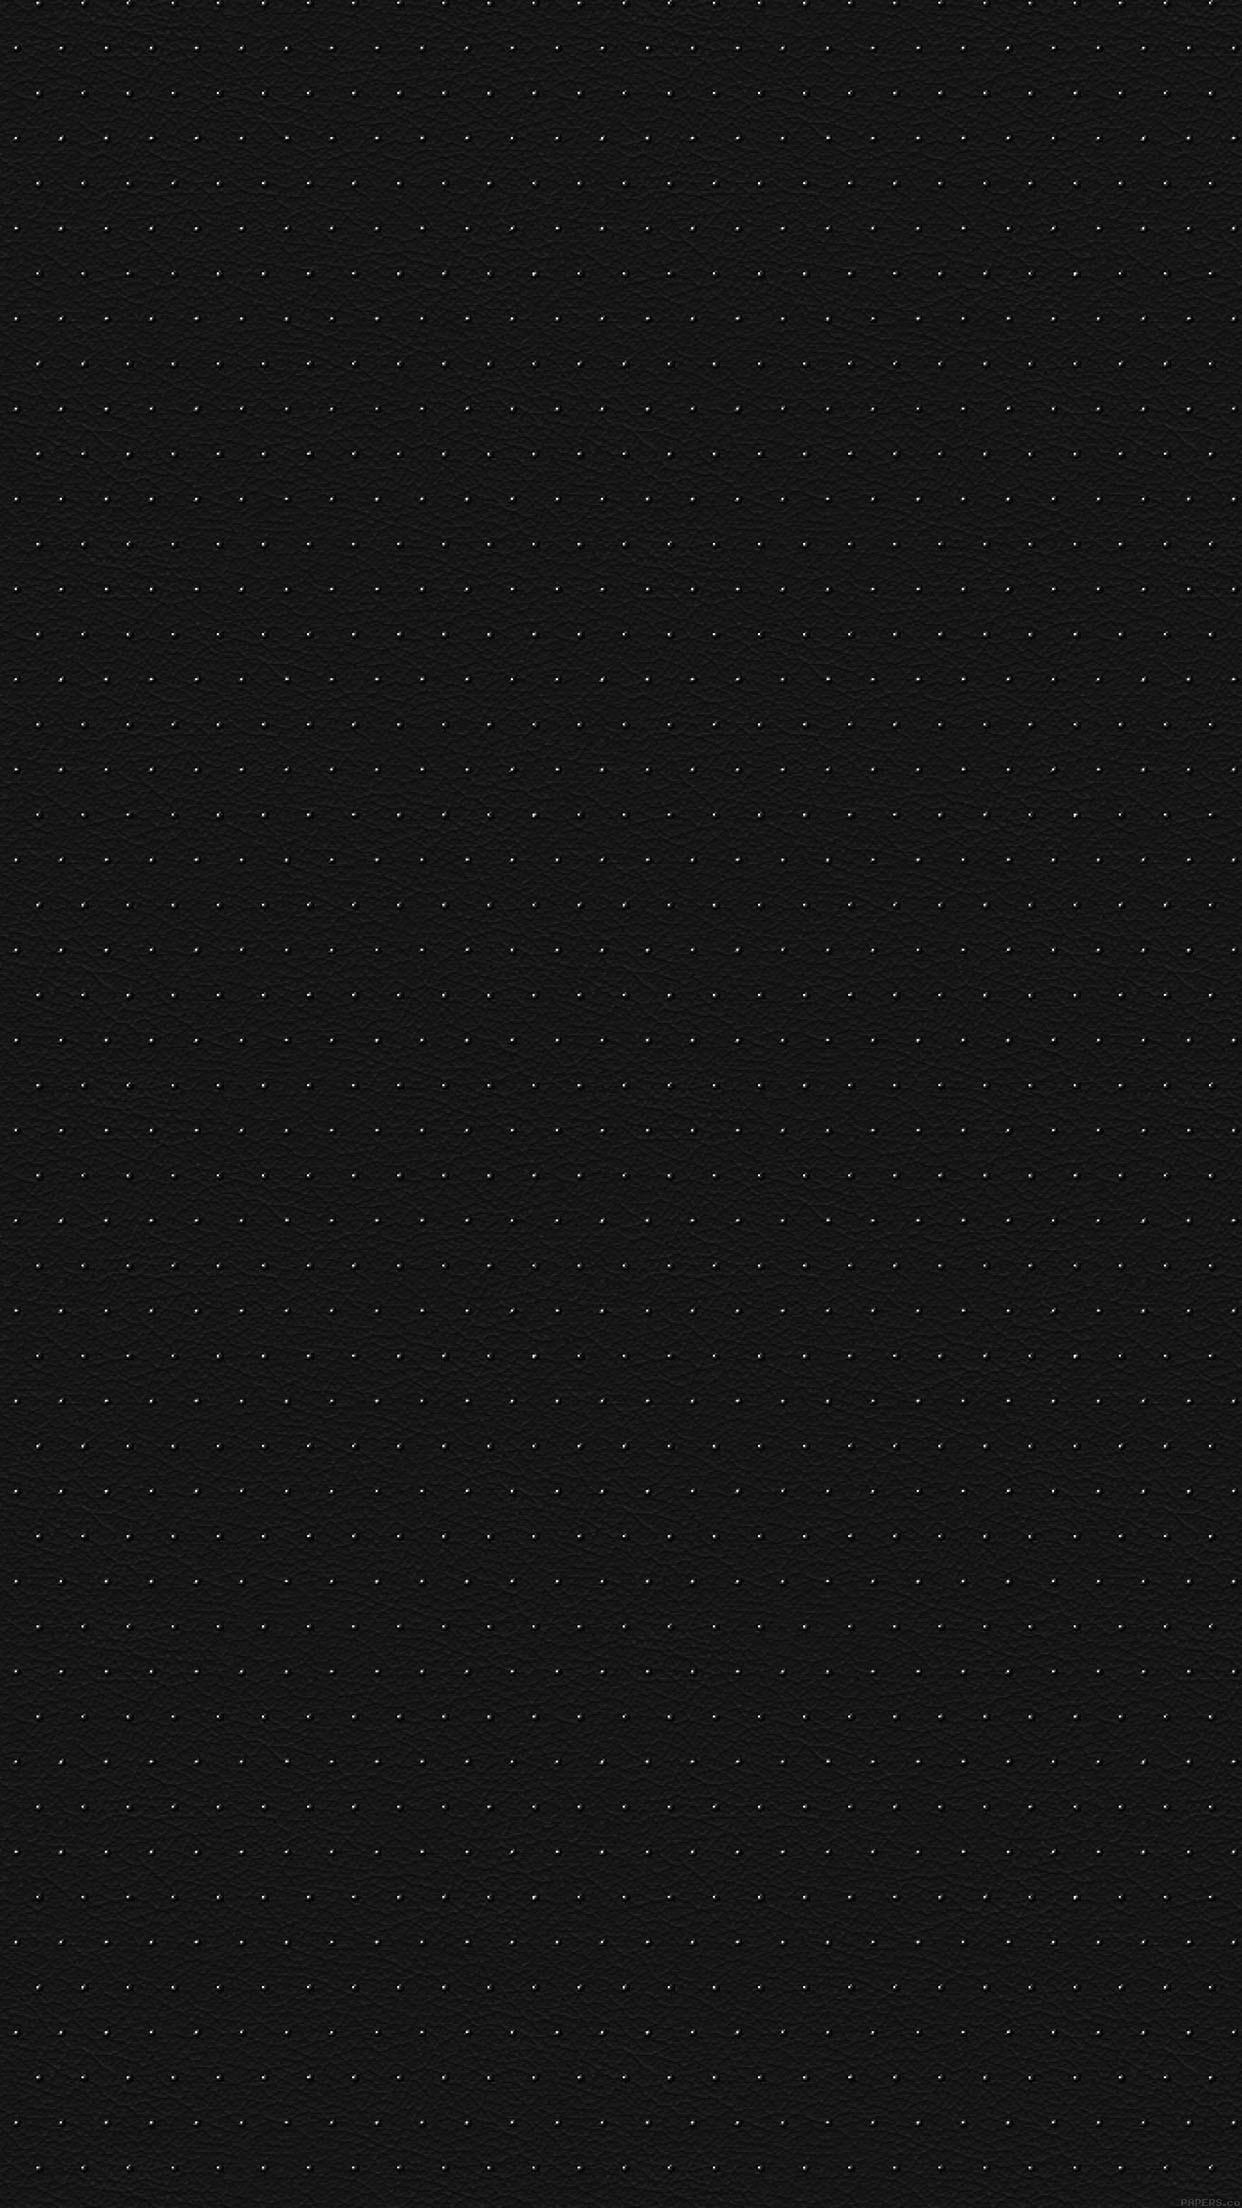 Amoled Solid Black Wallpapers - Wallpaper Cave